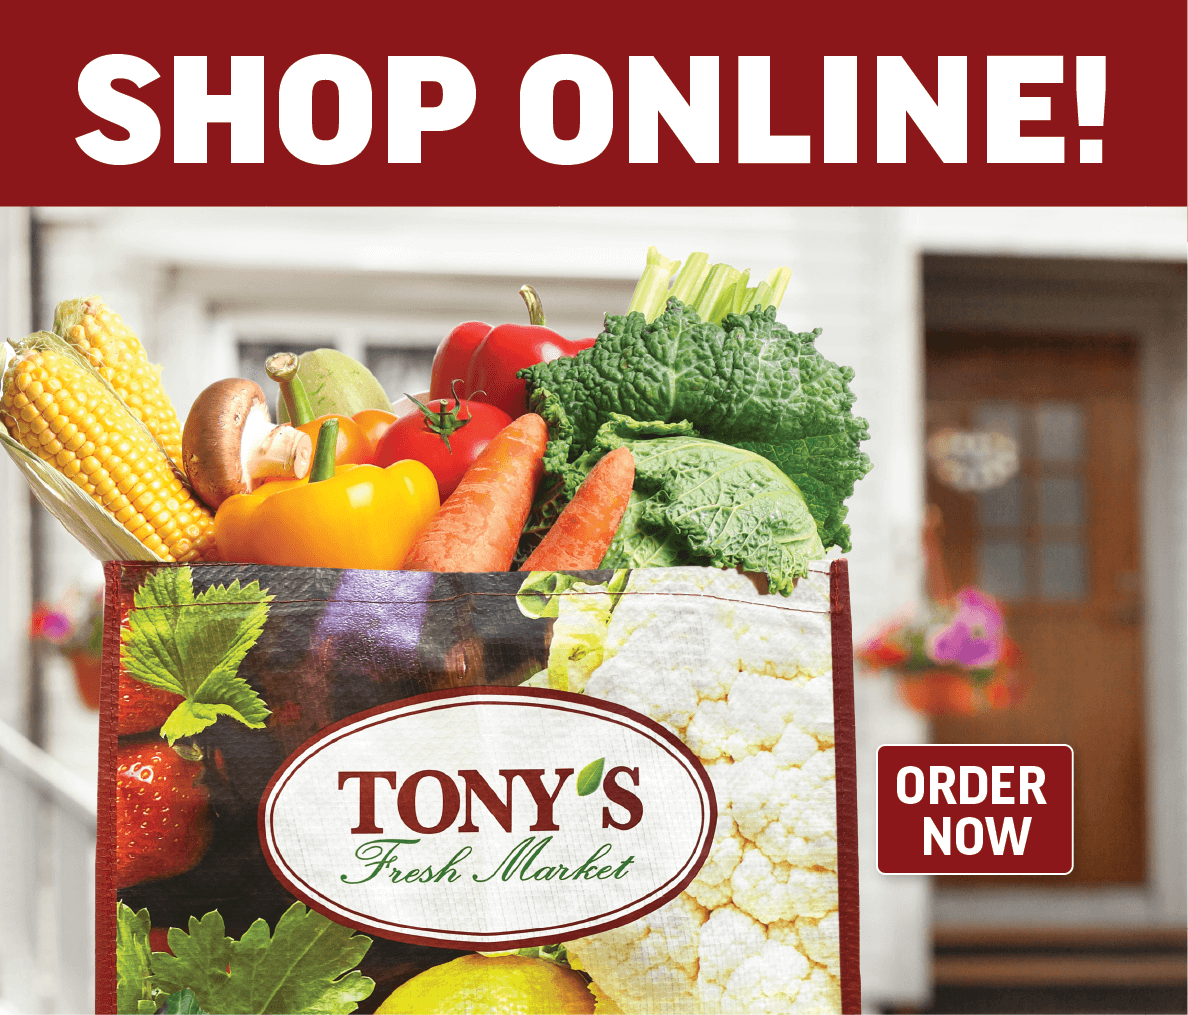 Tony’s Fresh Market offers grocery pickup and delivery with our partners at Instacart, DoorDash, Uber Eats, and Shipt